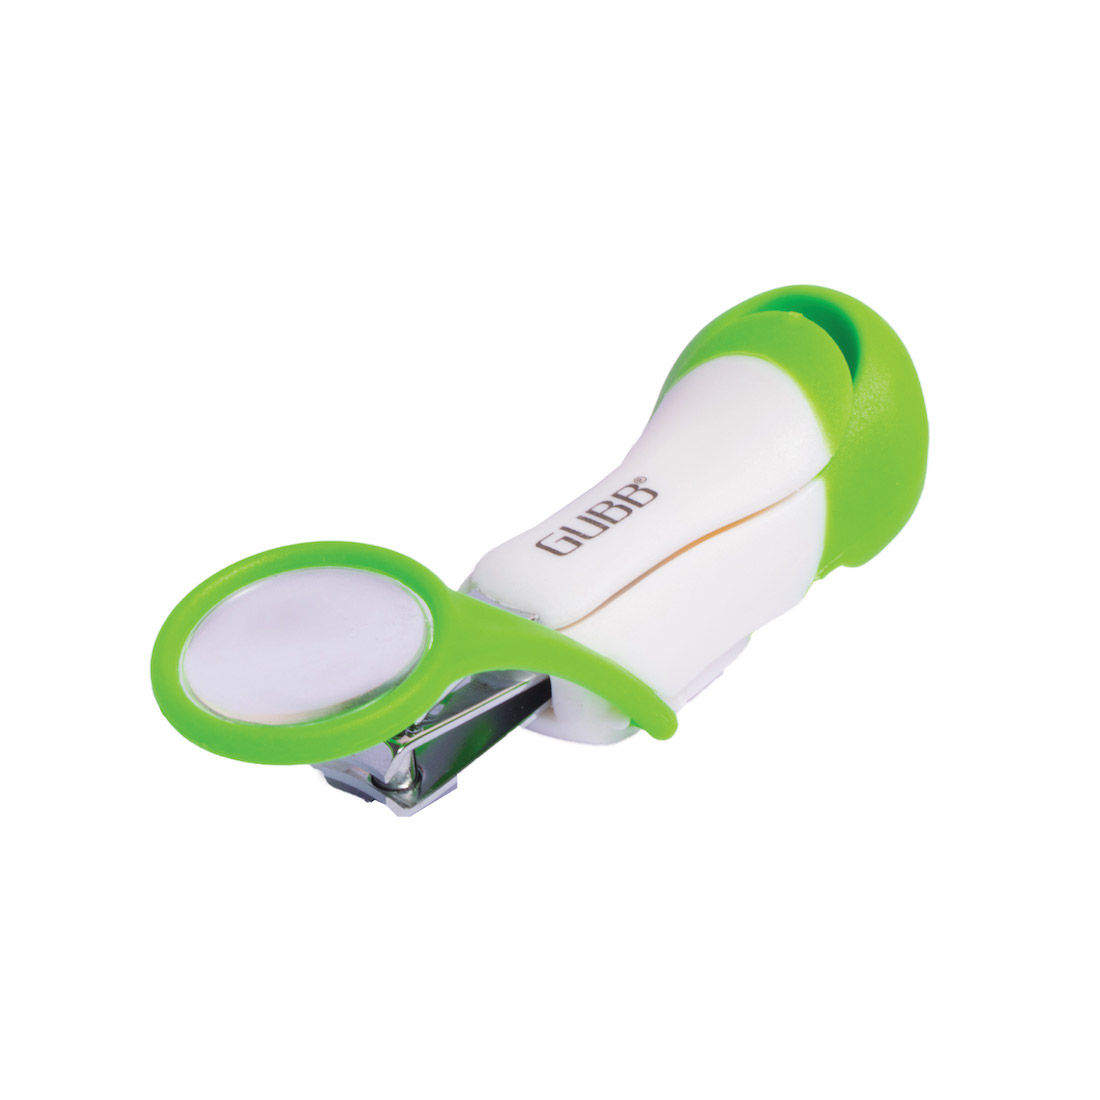 GUBB Baby Nail Cutter for Infants/New Born/Toddlers with Magnifying Glass (Green)